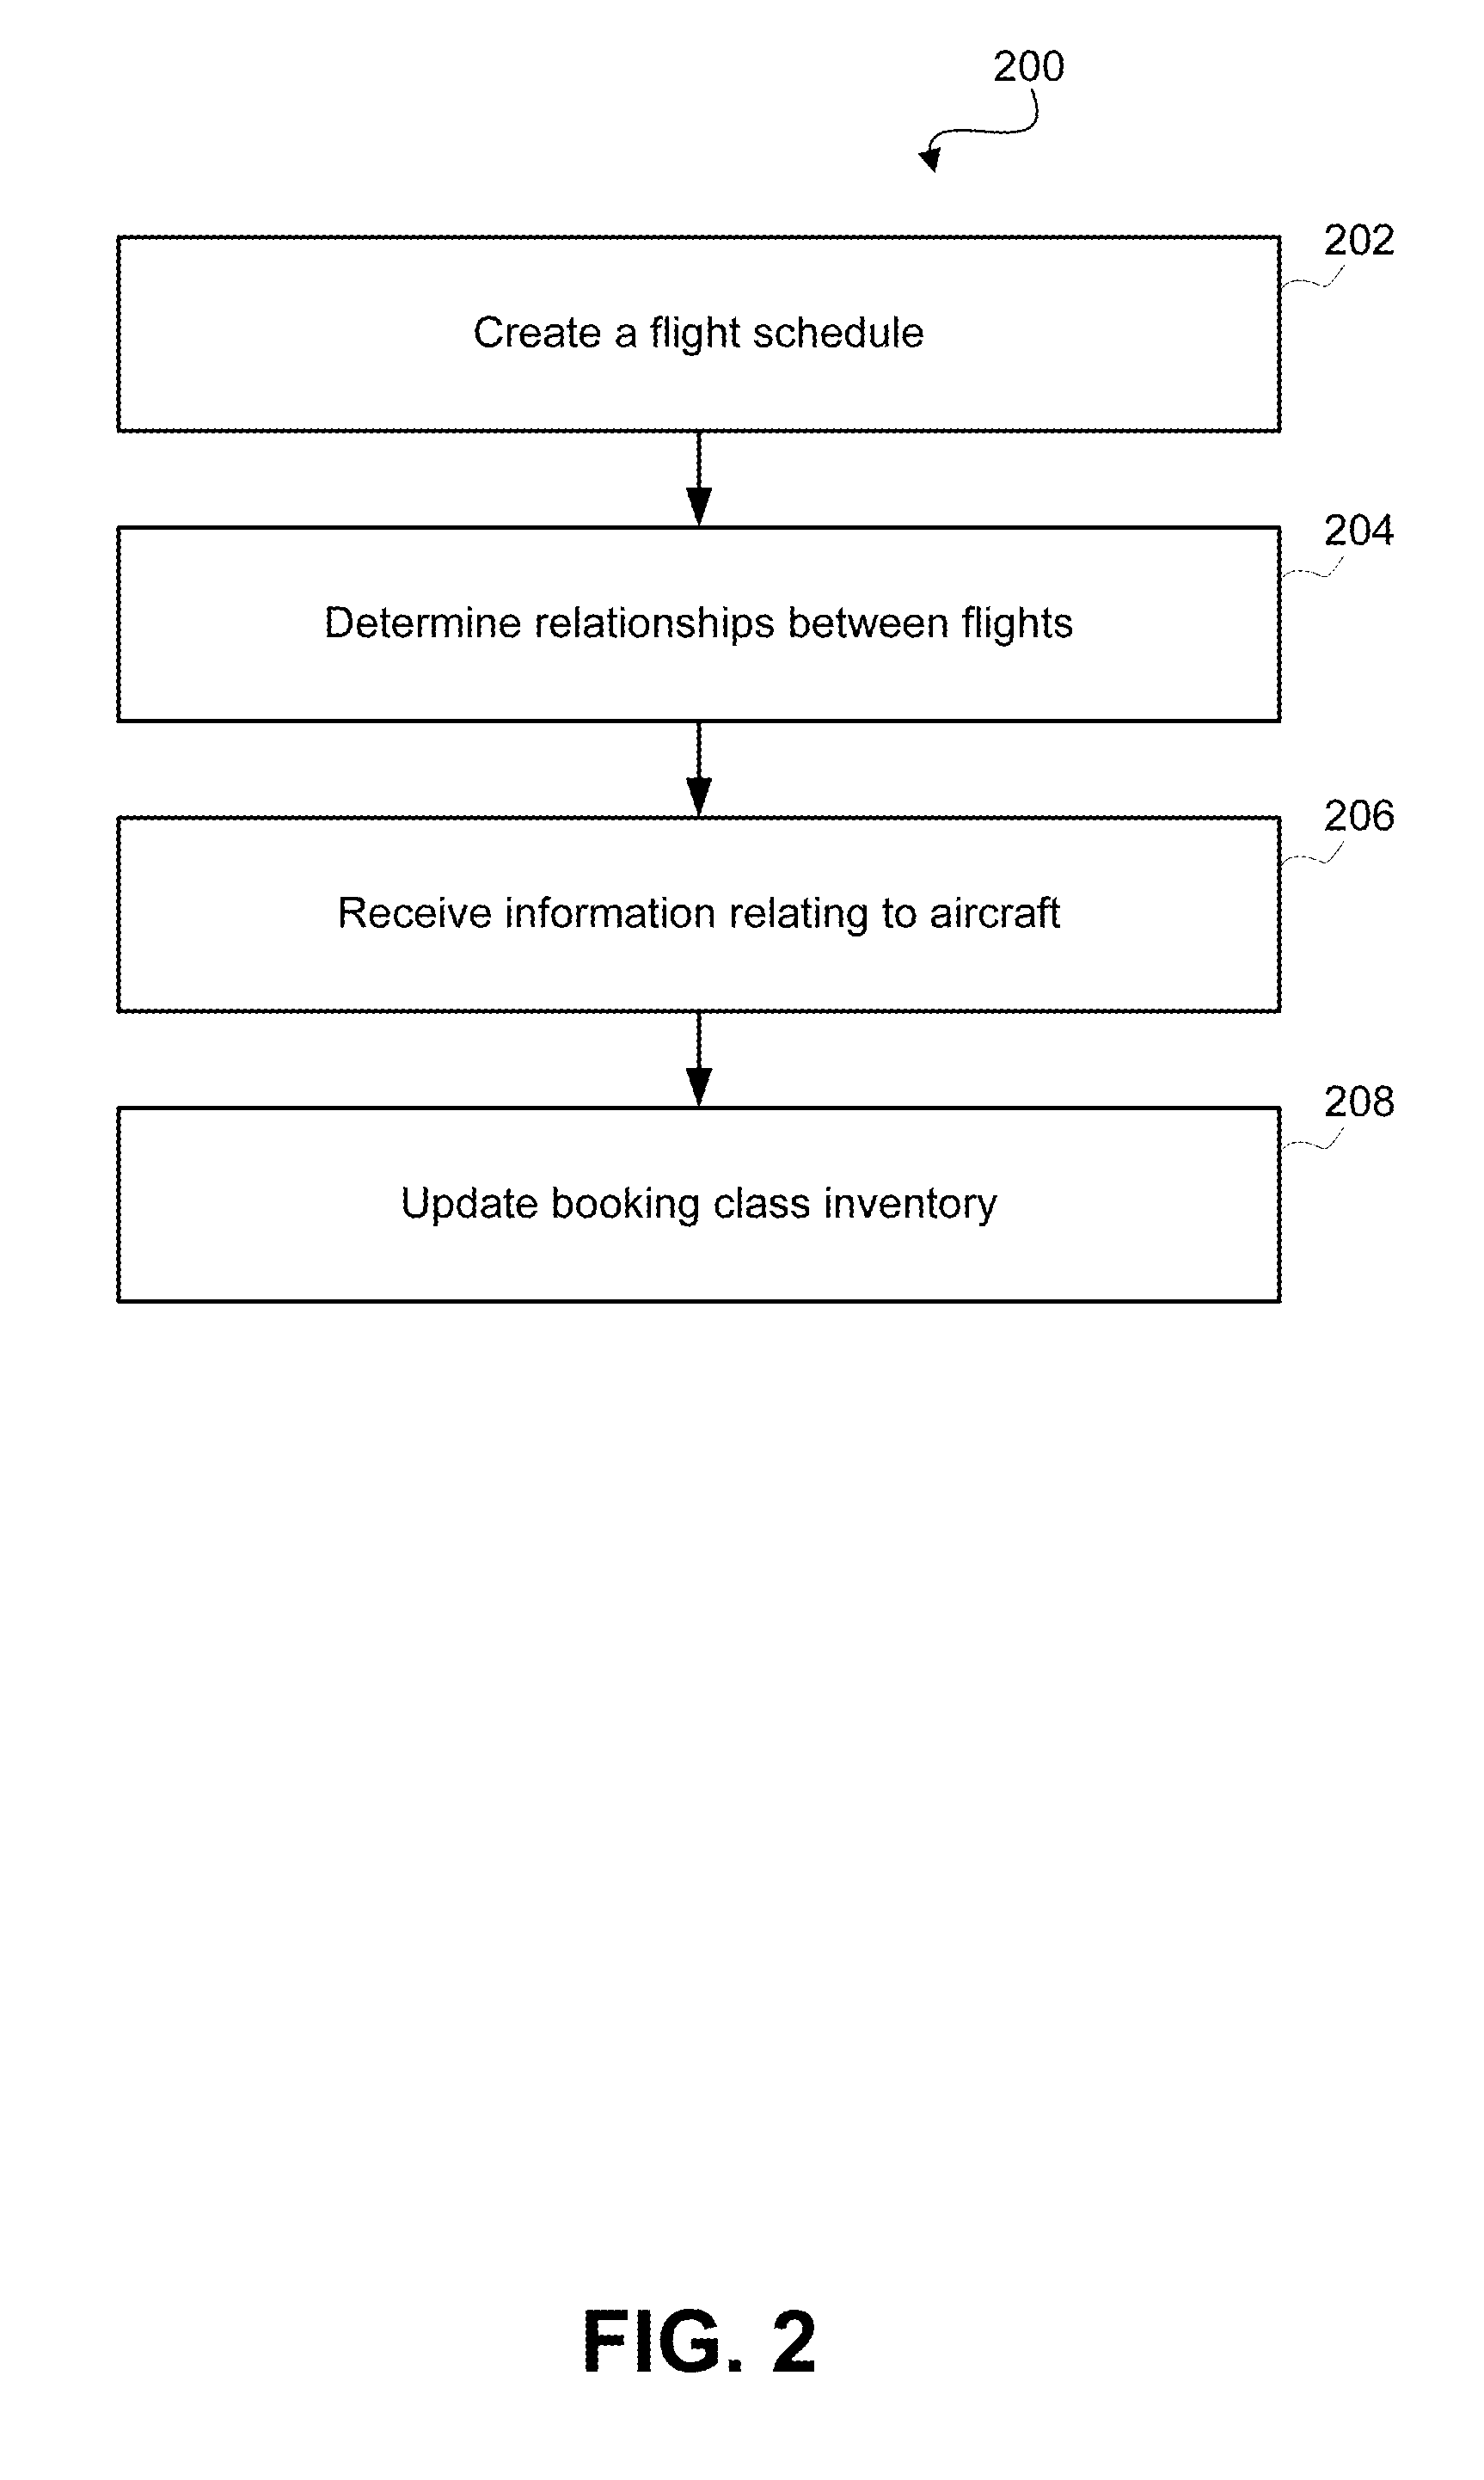 Systems, methods, and machine-readable storage media for interfacing with a computer flight system